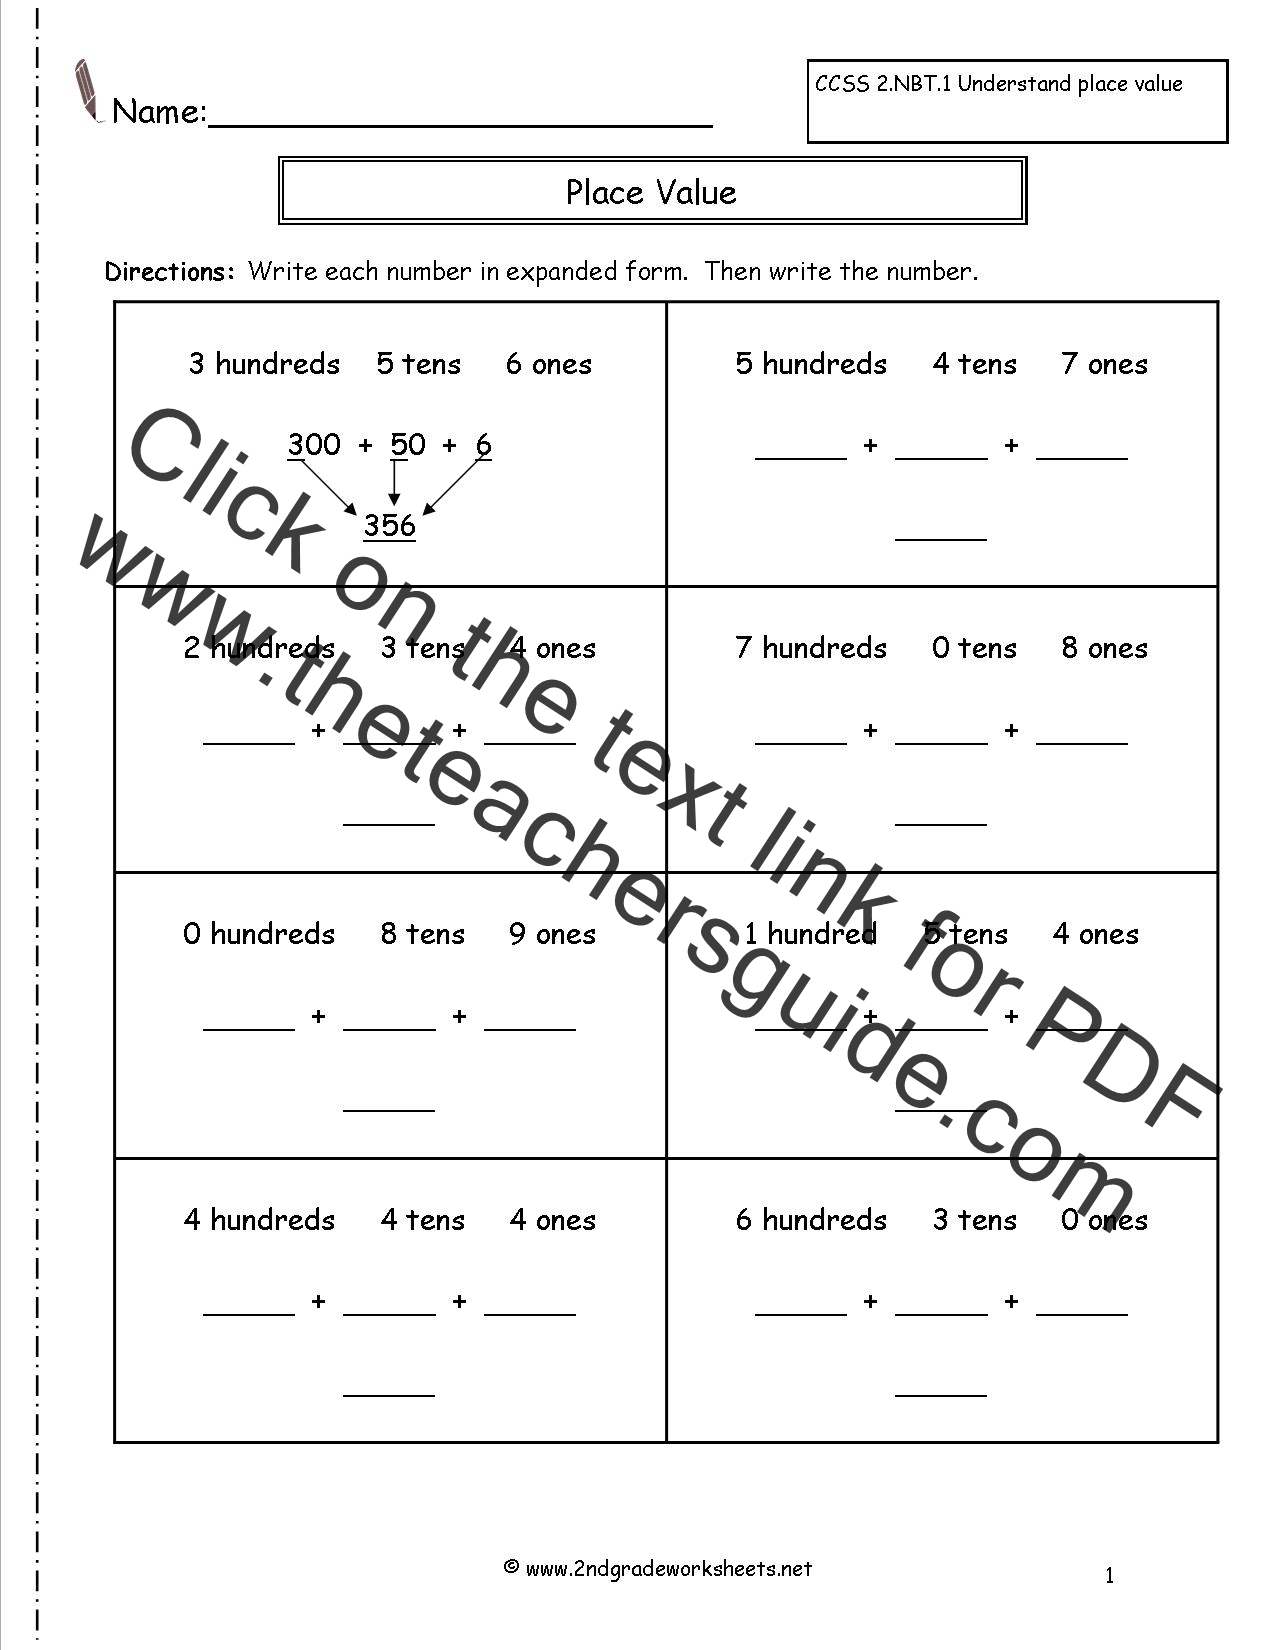 Reading And Writing Numbers Up To 10000 Worksheet